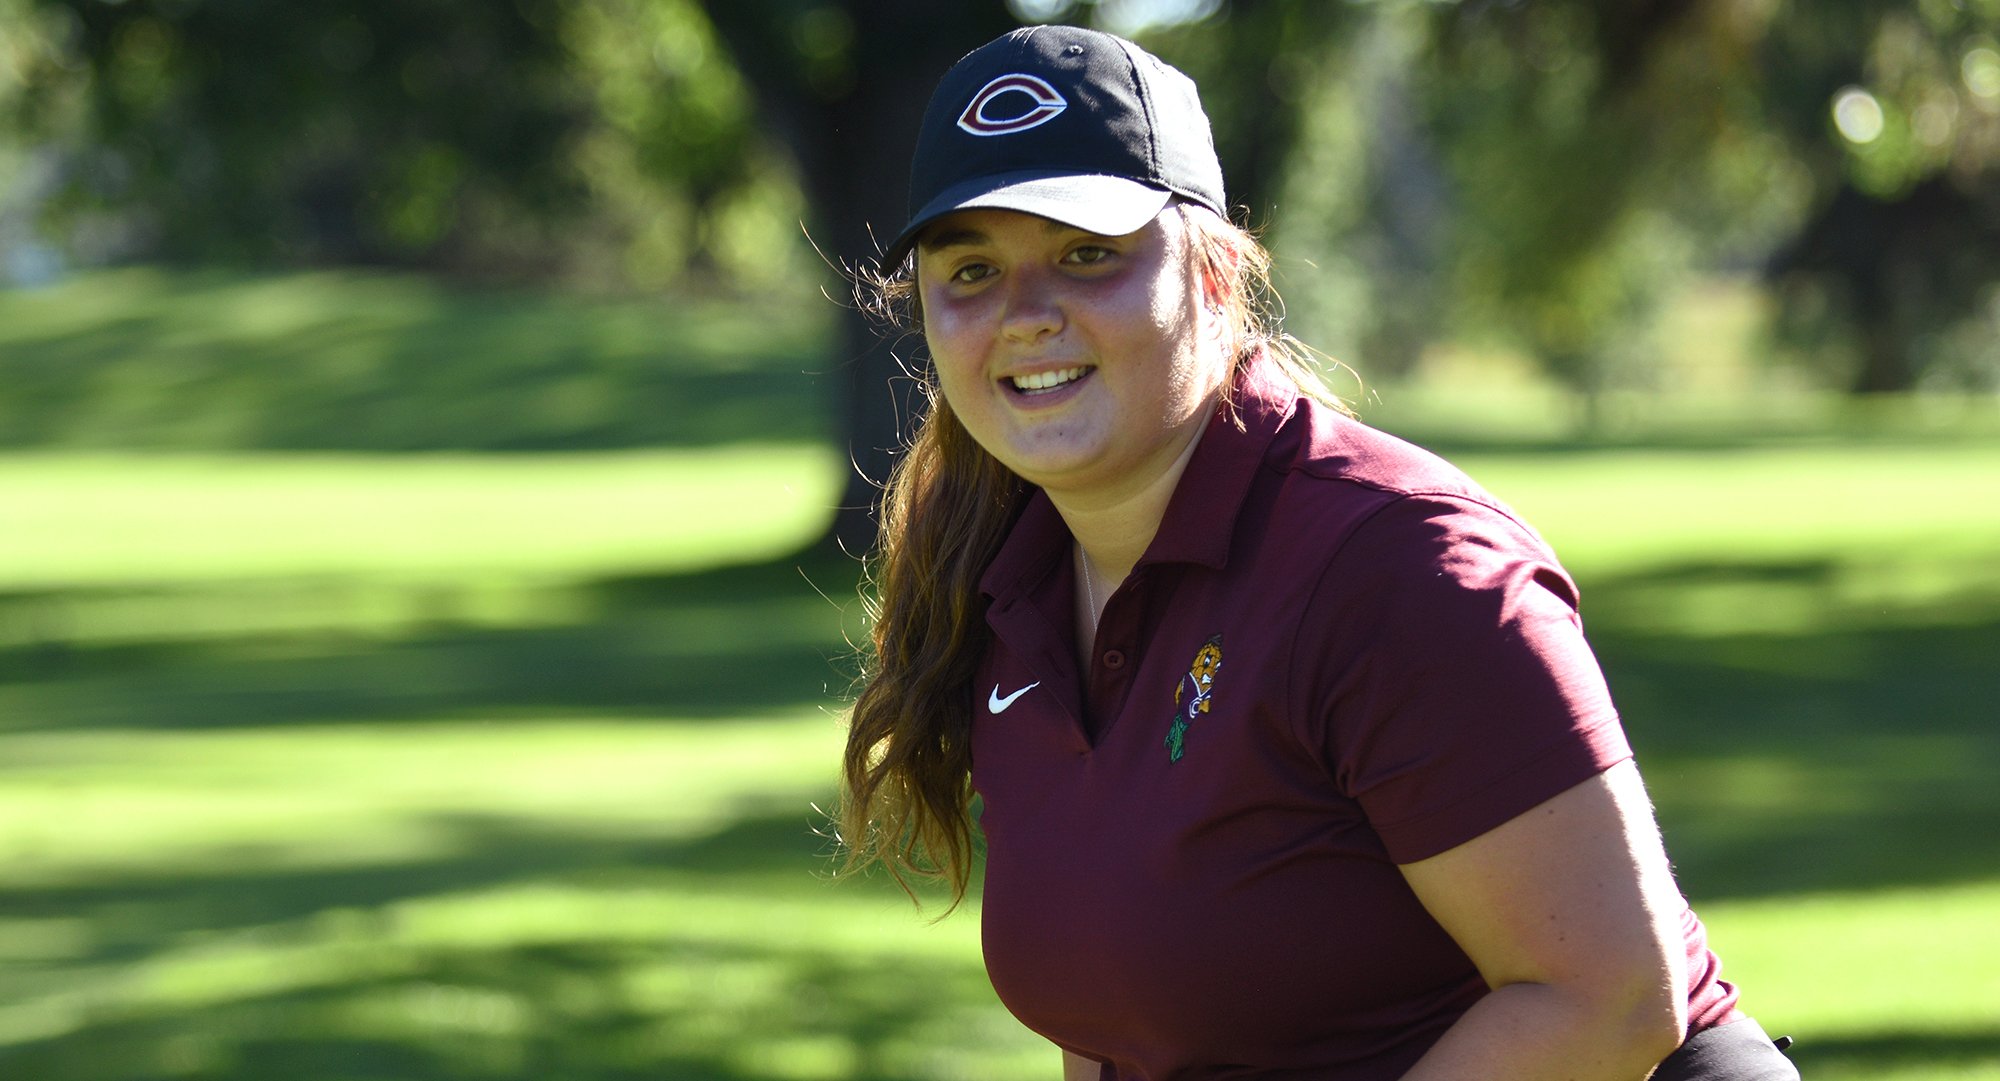 Senior Abbey Frauenholtz posted the best 2-round score of her collegiate career and helped Concordia to a 13th-place finish at the St. Kate’s Fall Invite.